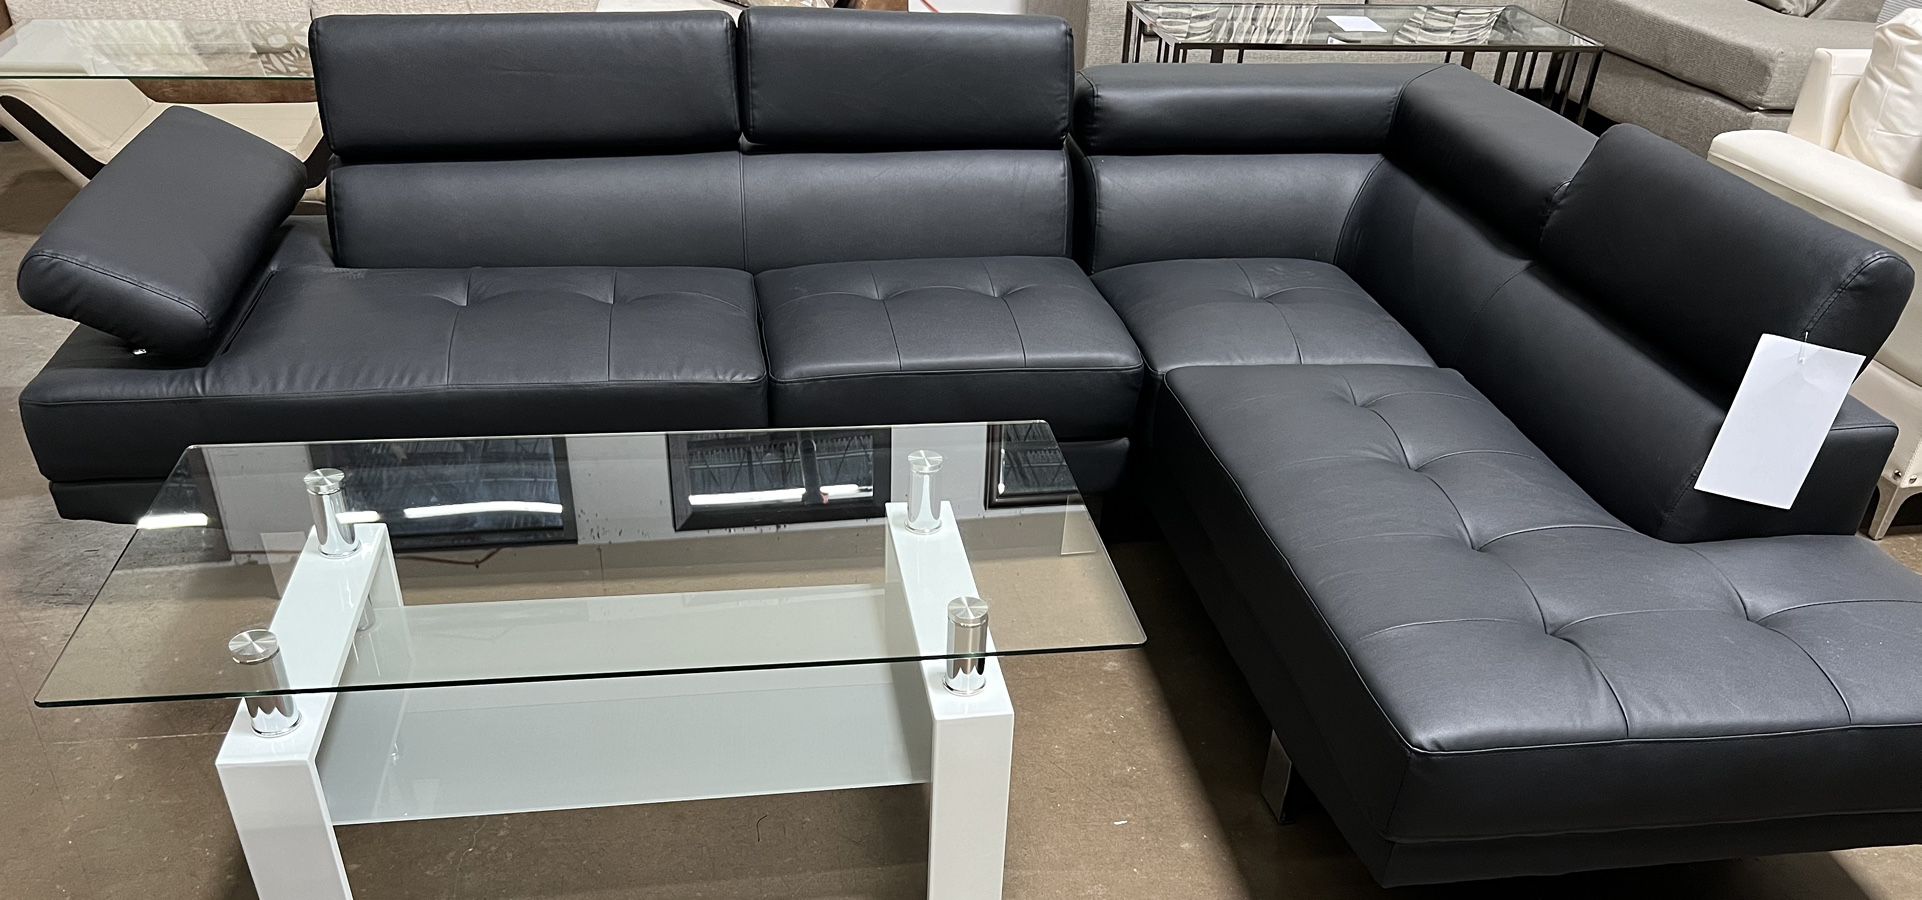 BLACK LEATHER SECTIONAL COUCH SET WITH ADJUSTABLE HEADREST